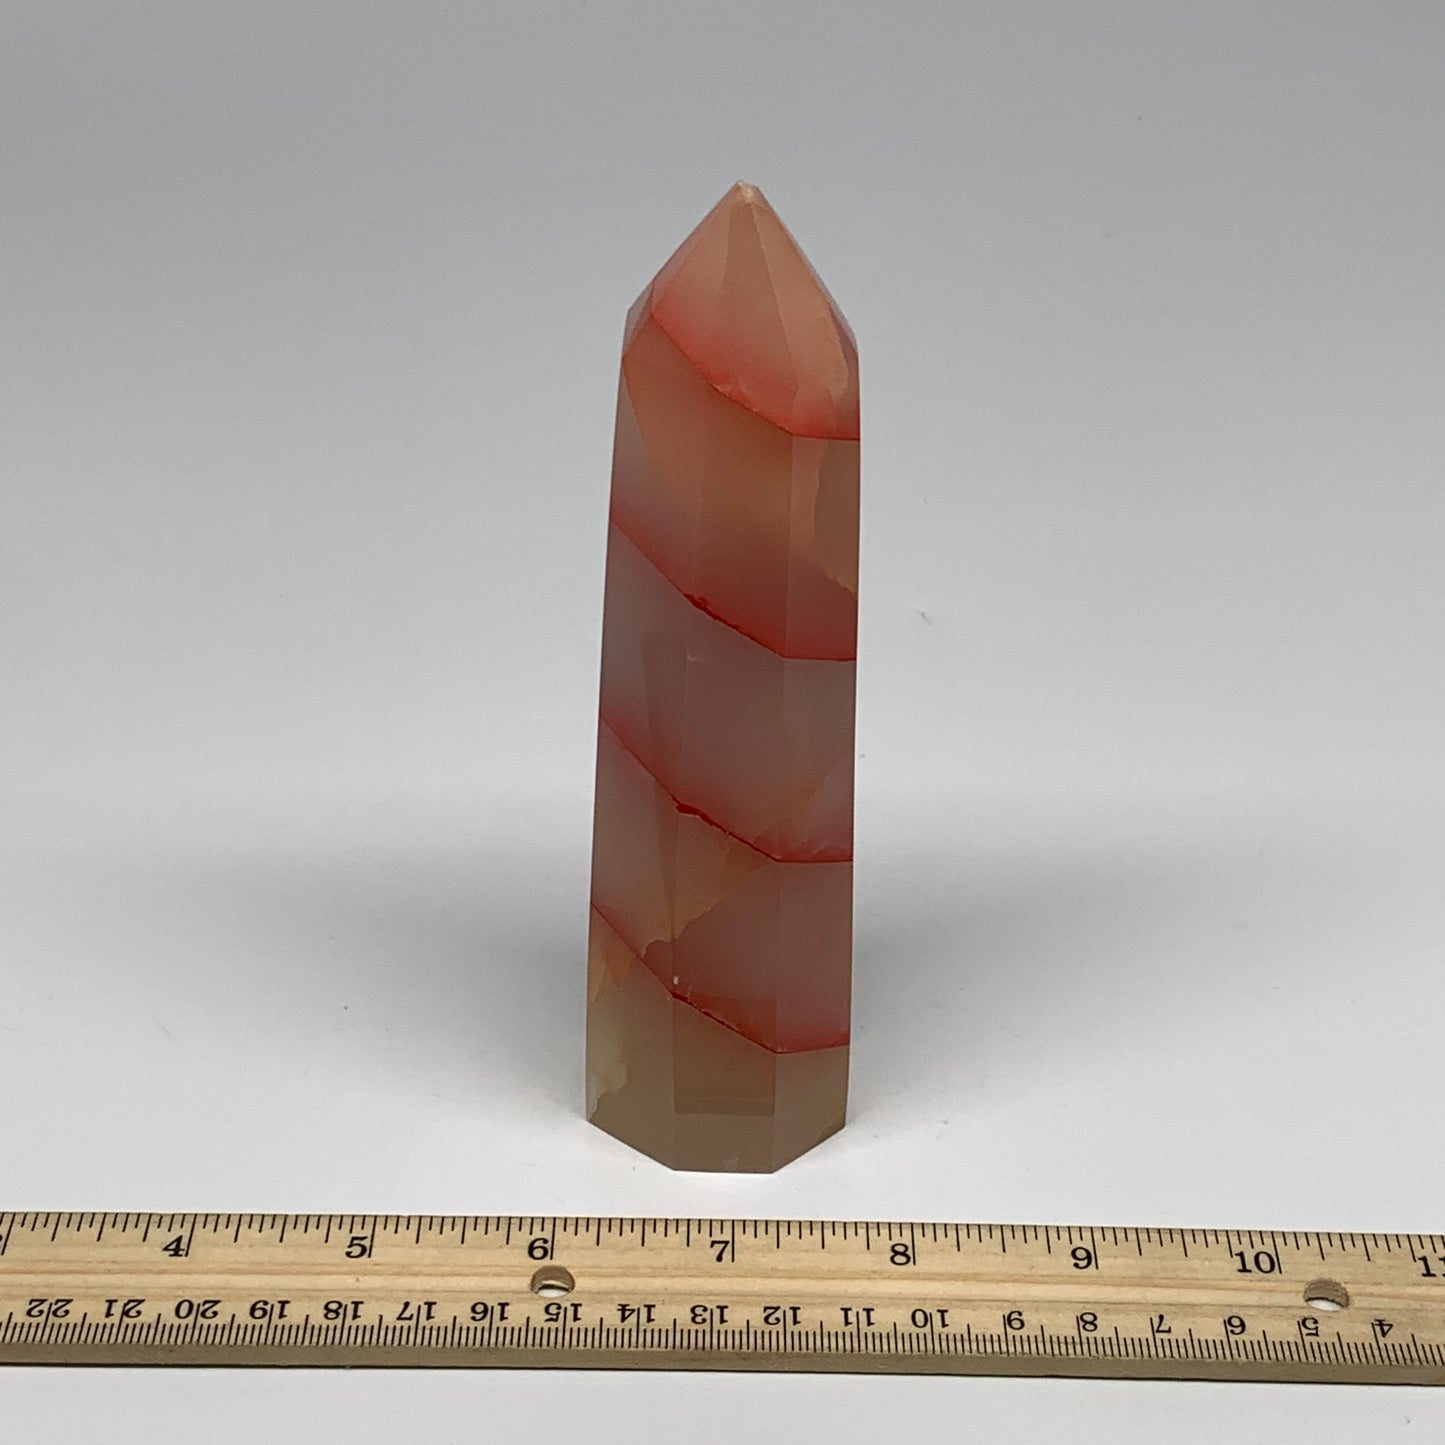 399.1g, 5.8"x1.6"x1.5" Dyed/Heated Calcite Point Tower Obelisk Crystal, B24979